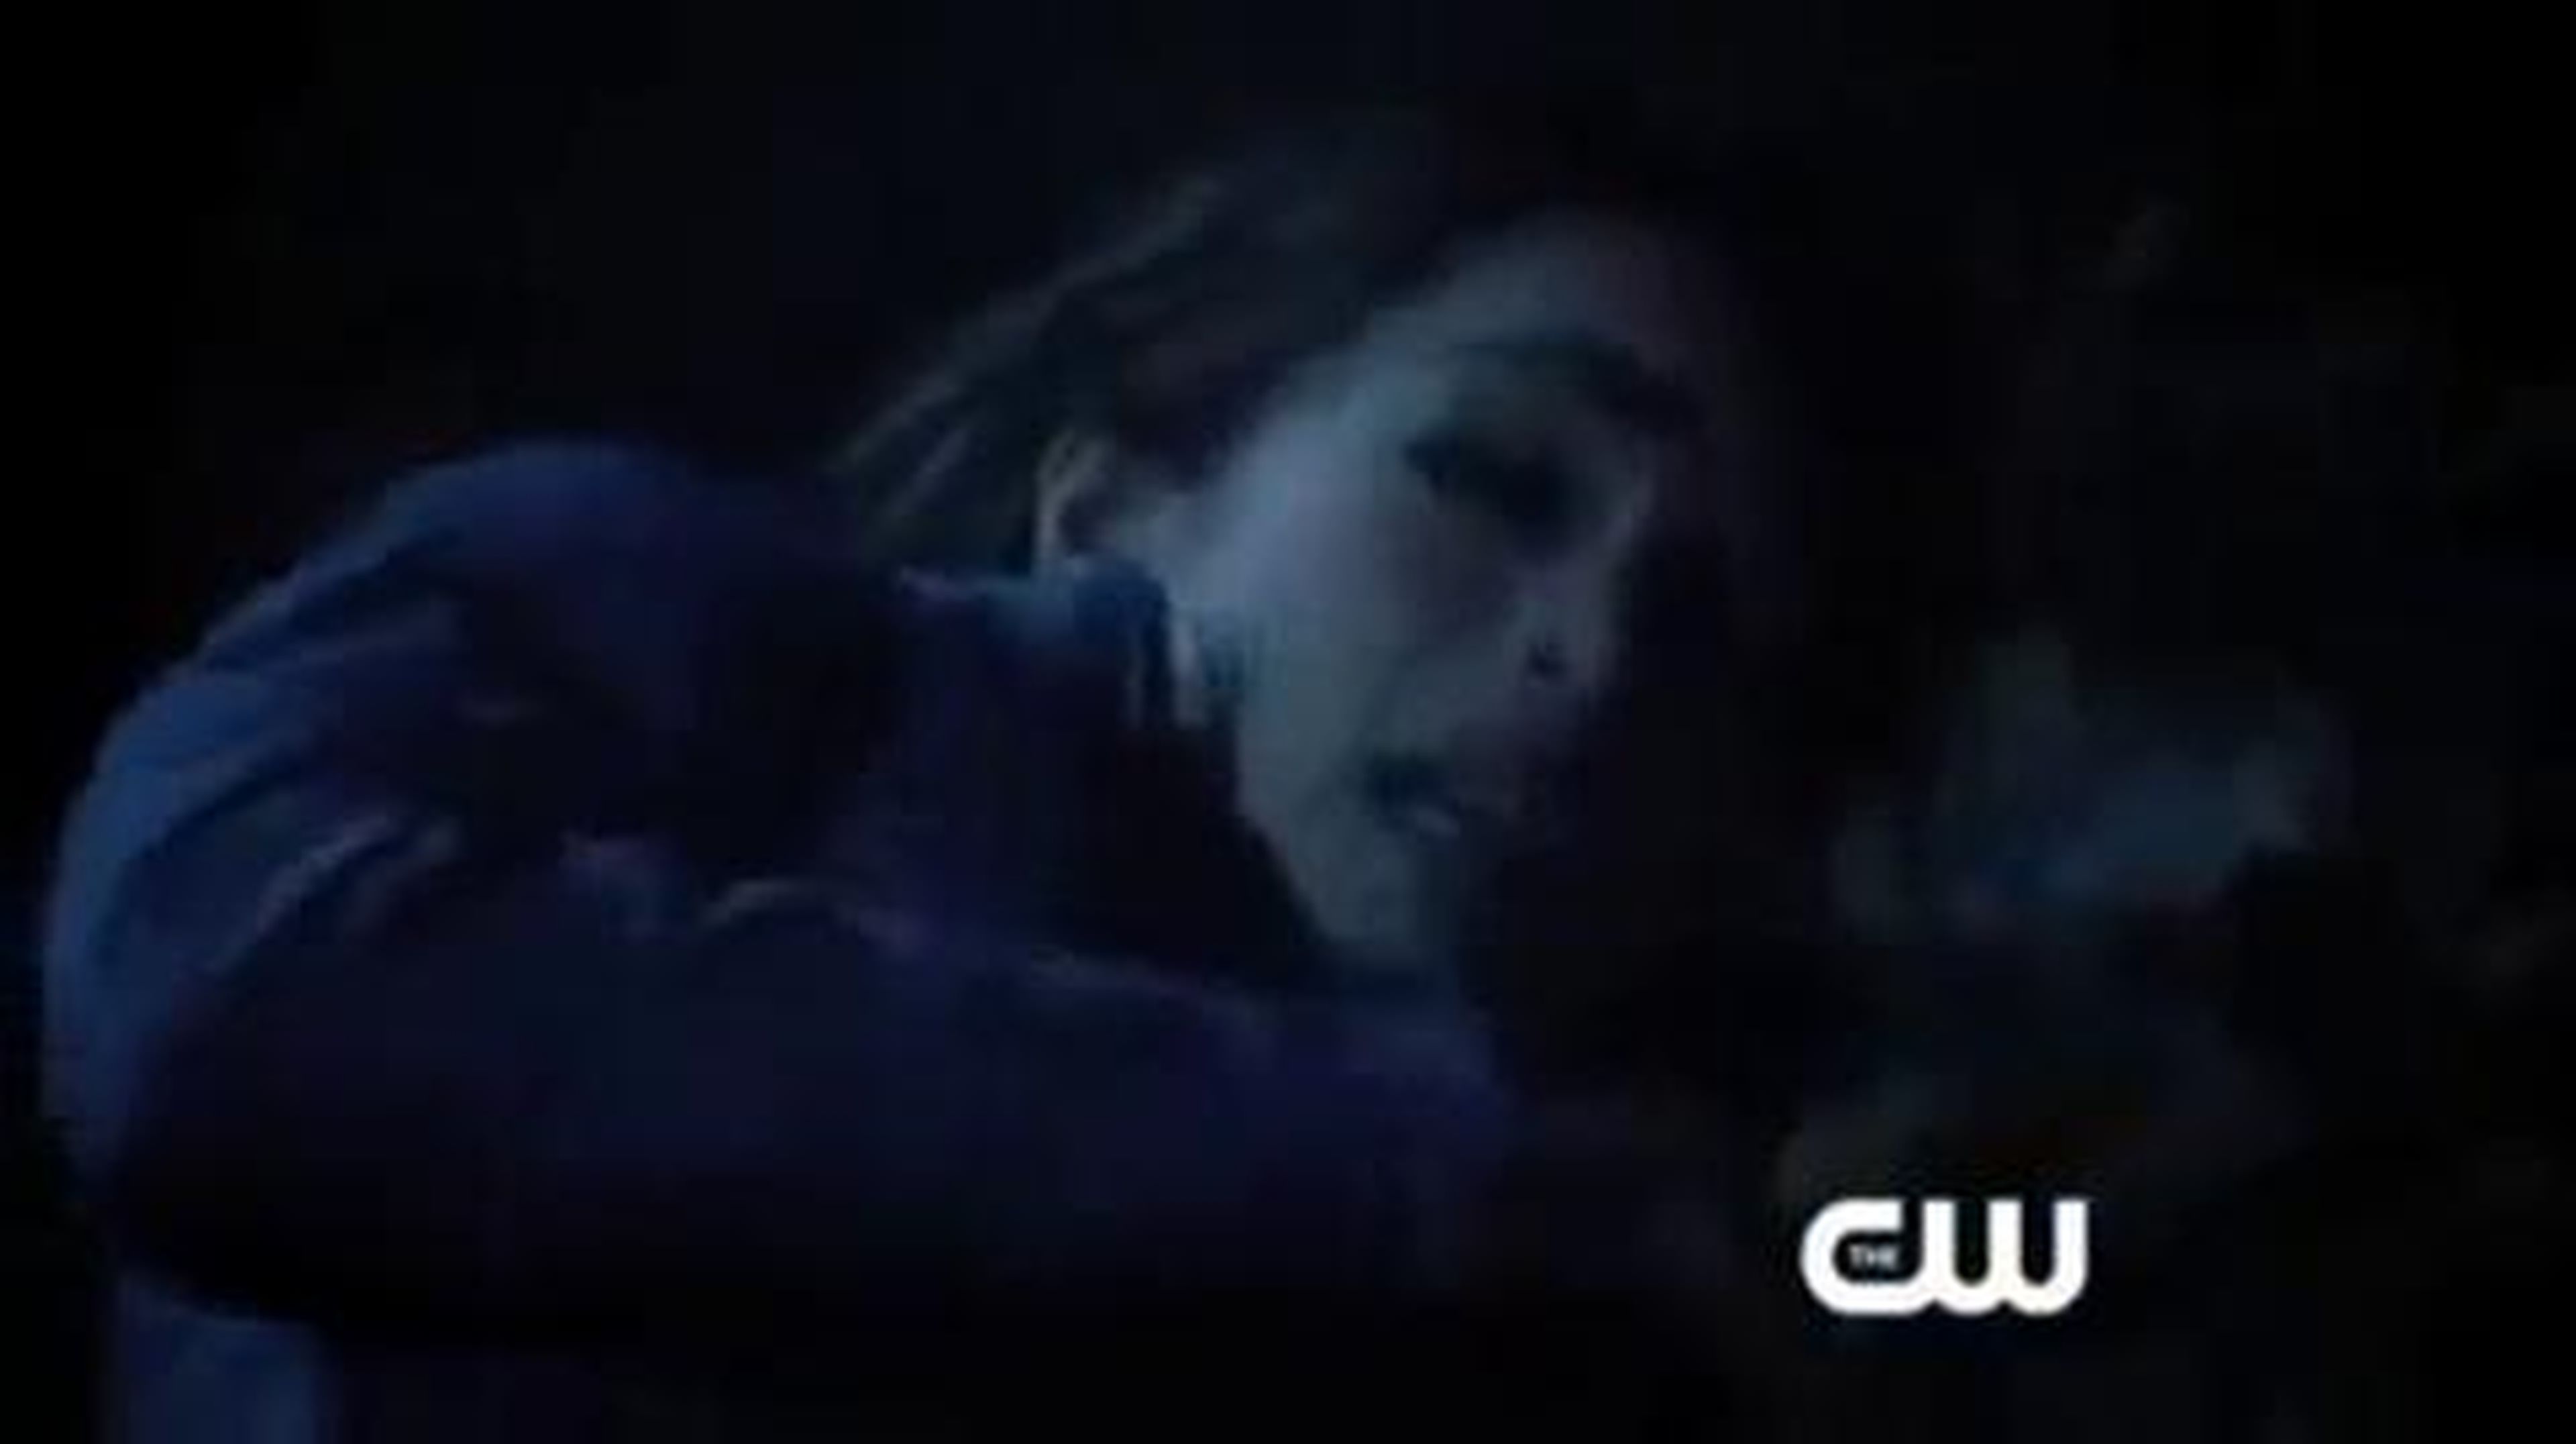 Beauty and the Beast - Official Trailer 2012 - The CW